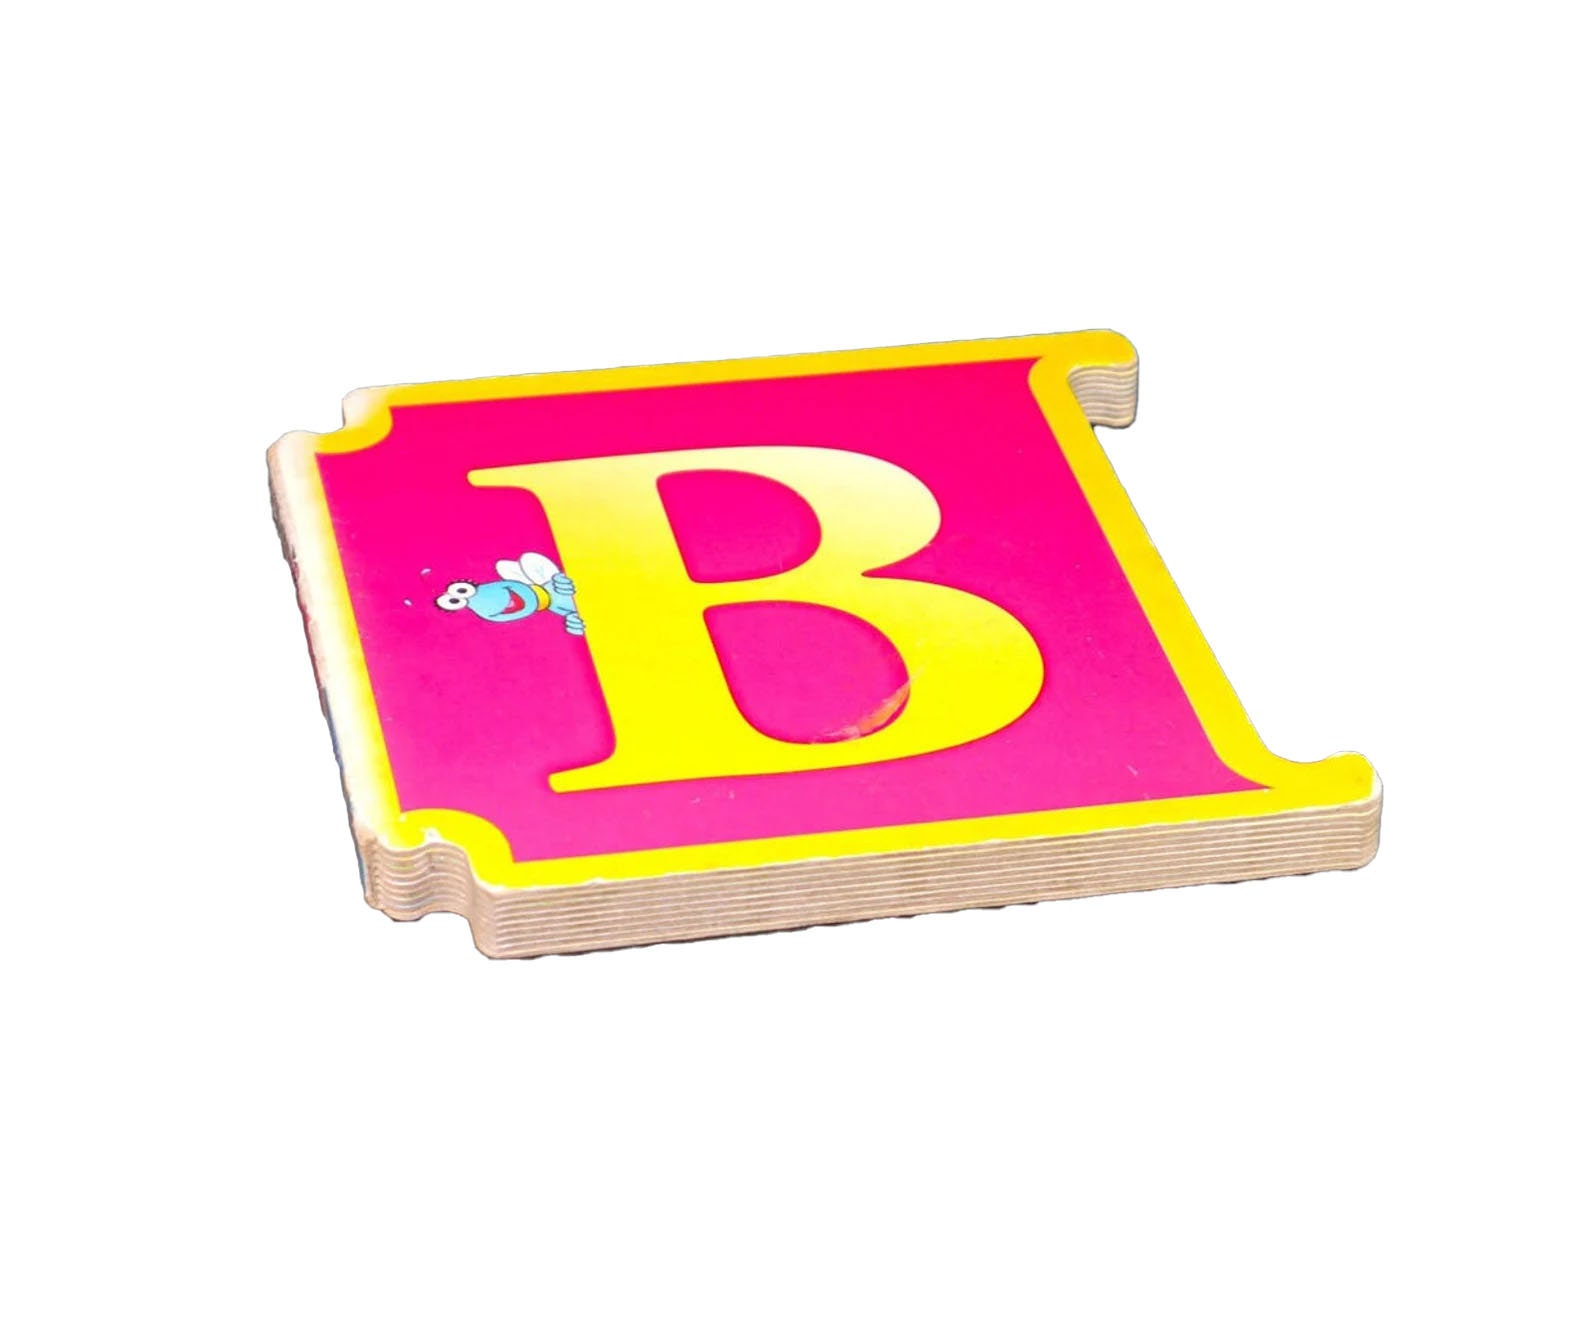 Letter B Book